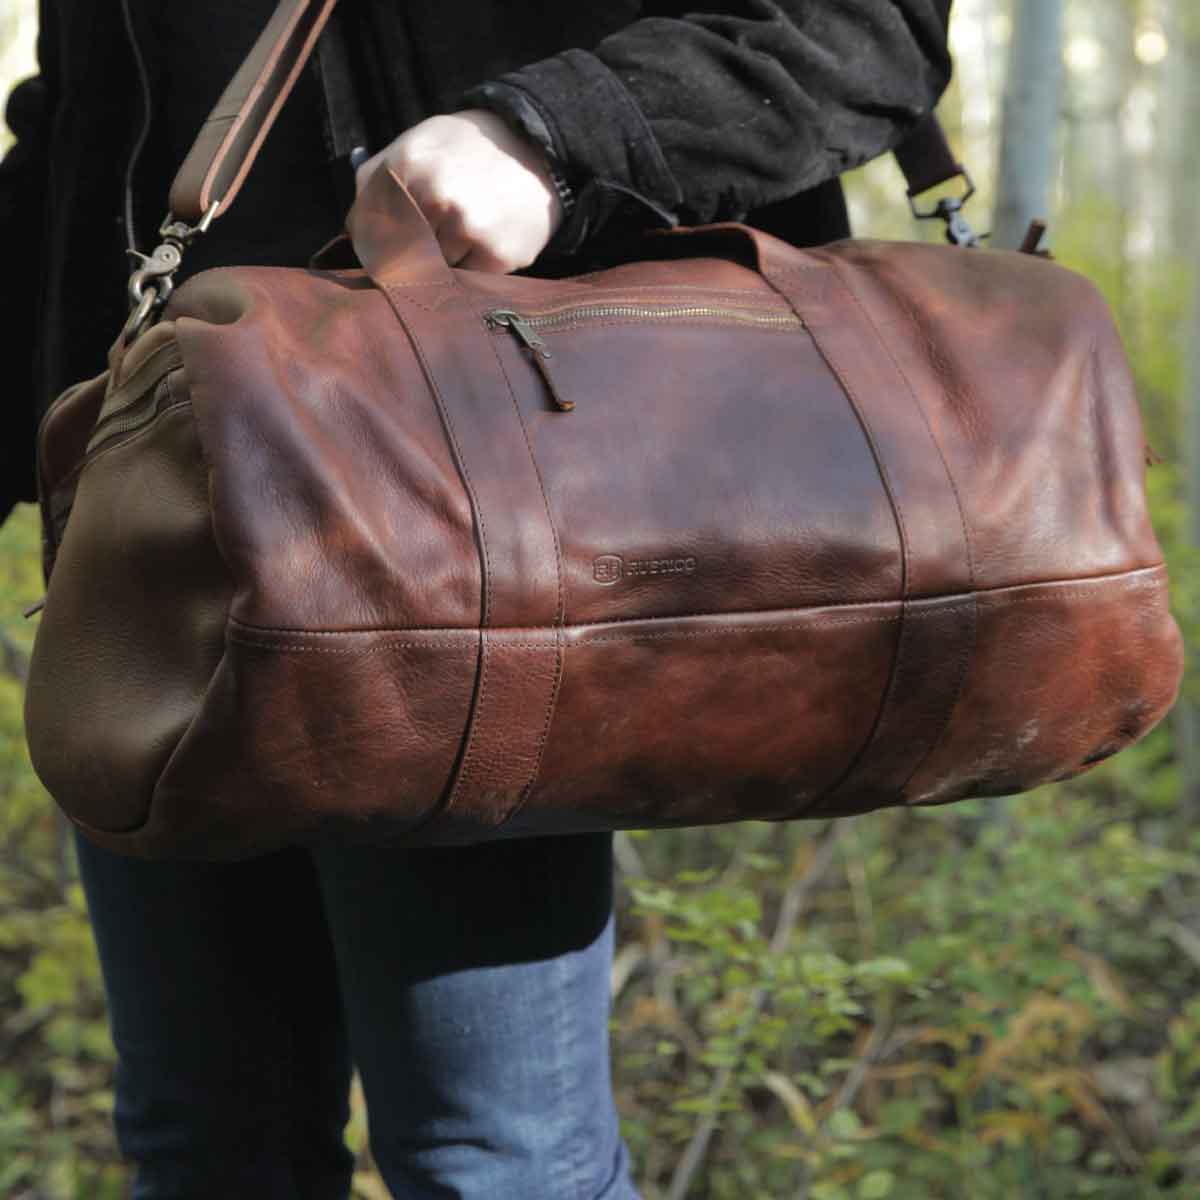 Full Grain Leather Duffle Bag  Vintage Leather Duffle Bag by Rustico